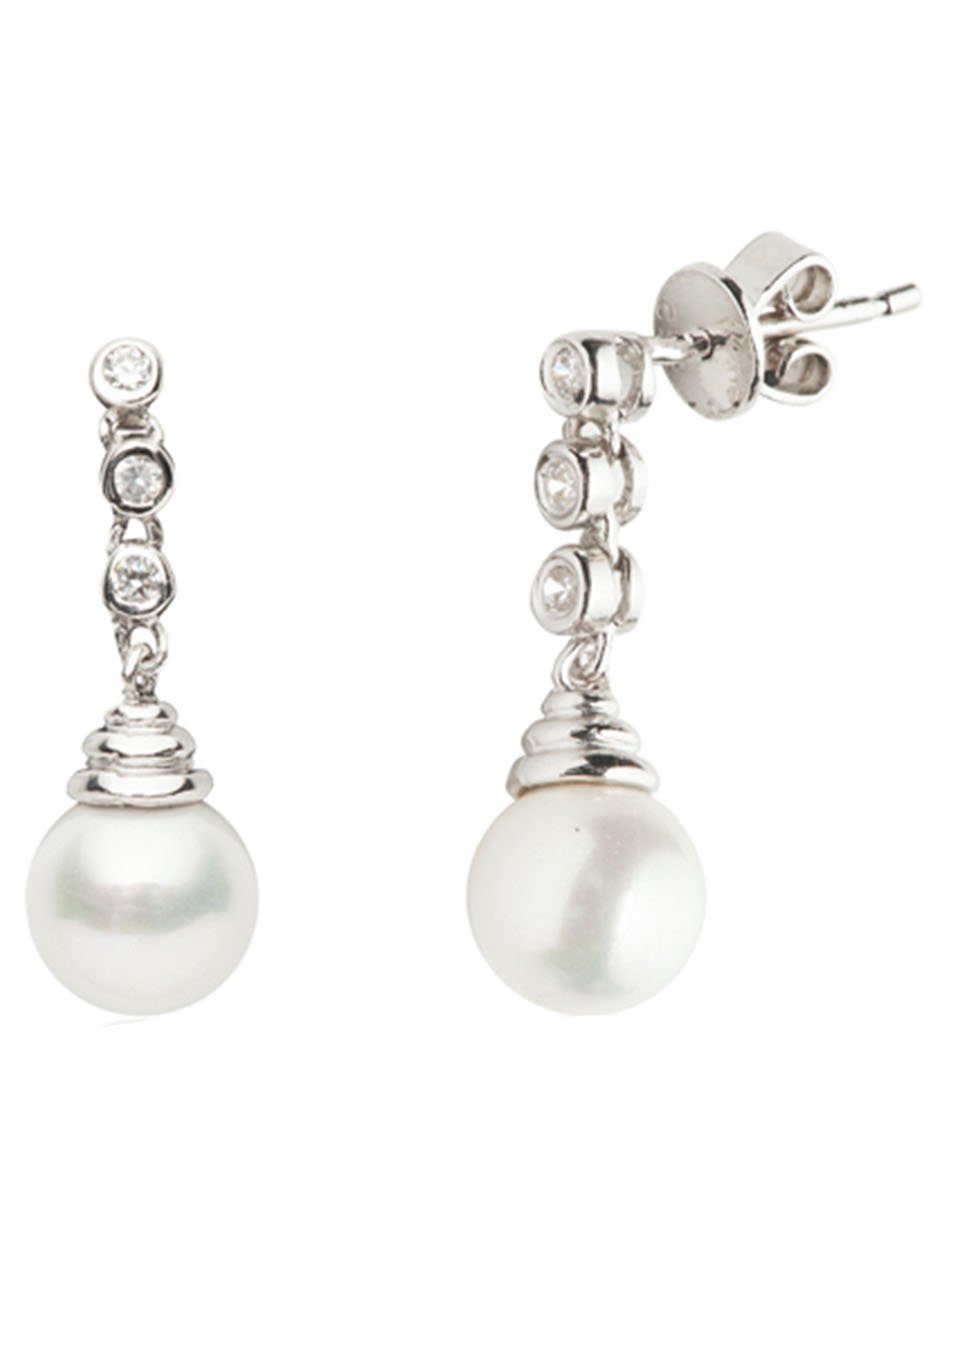 mit mit - JEWELLERY UK.BR.1204.0001, Perle Ohrstecker (synth) PEARL, CLASSY Paar UNIKE (synth) Zirkonia